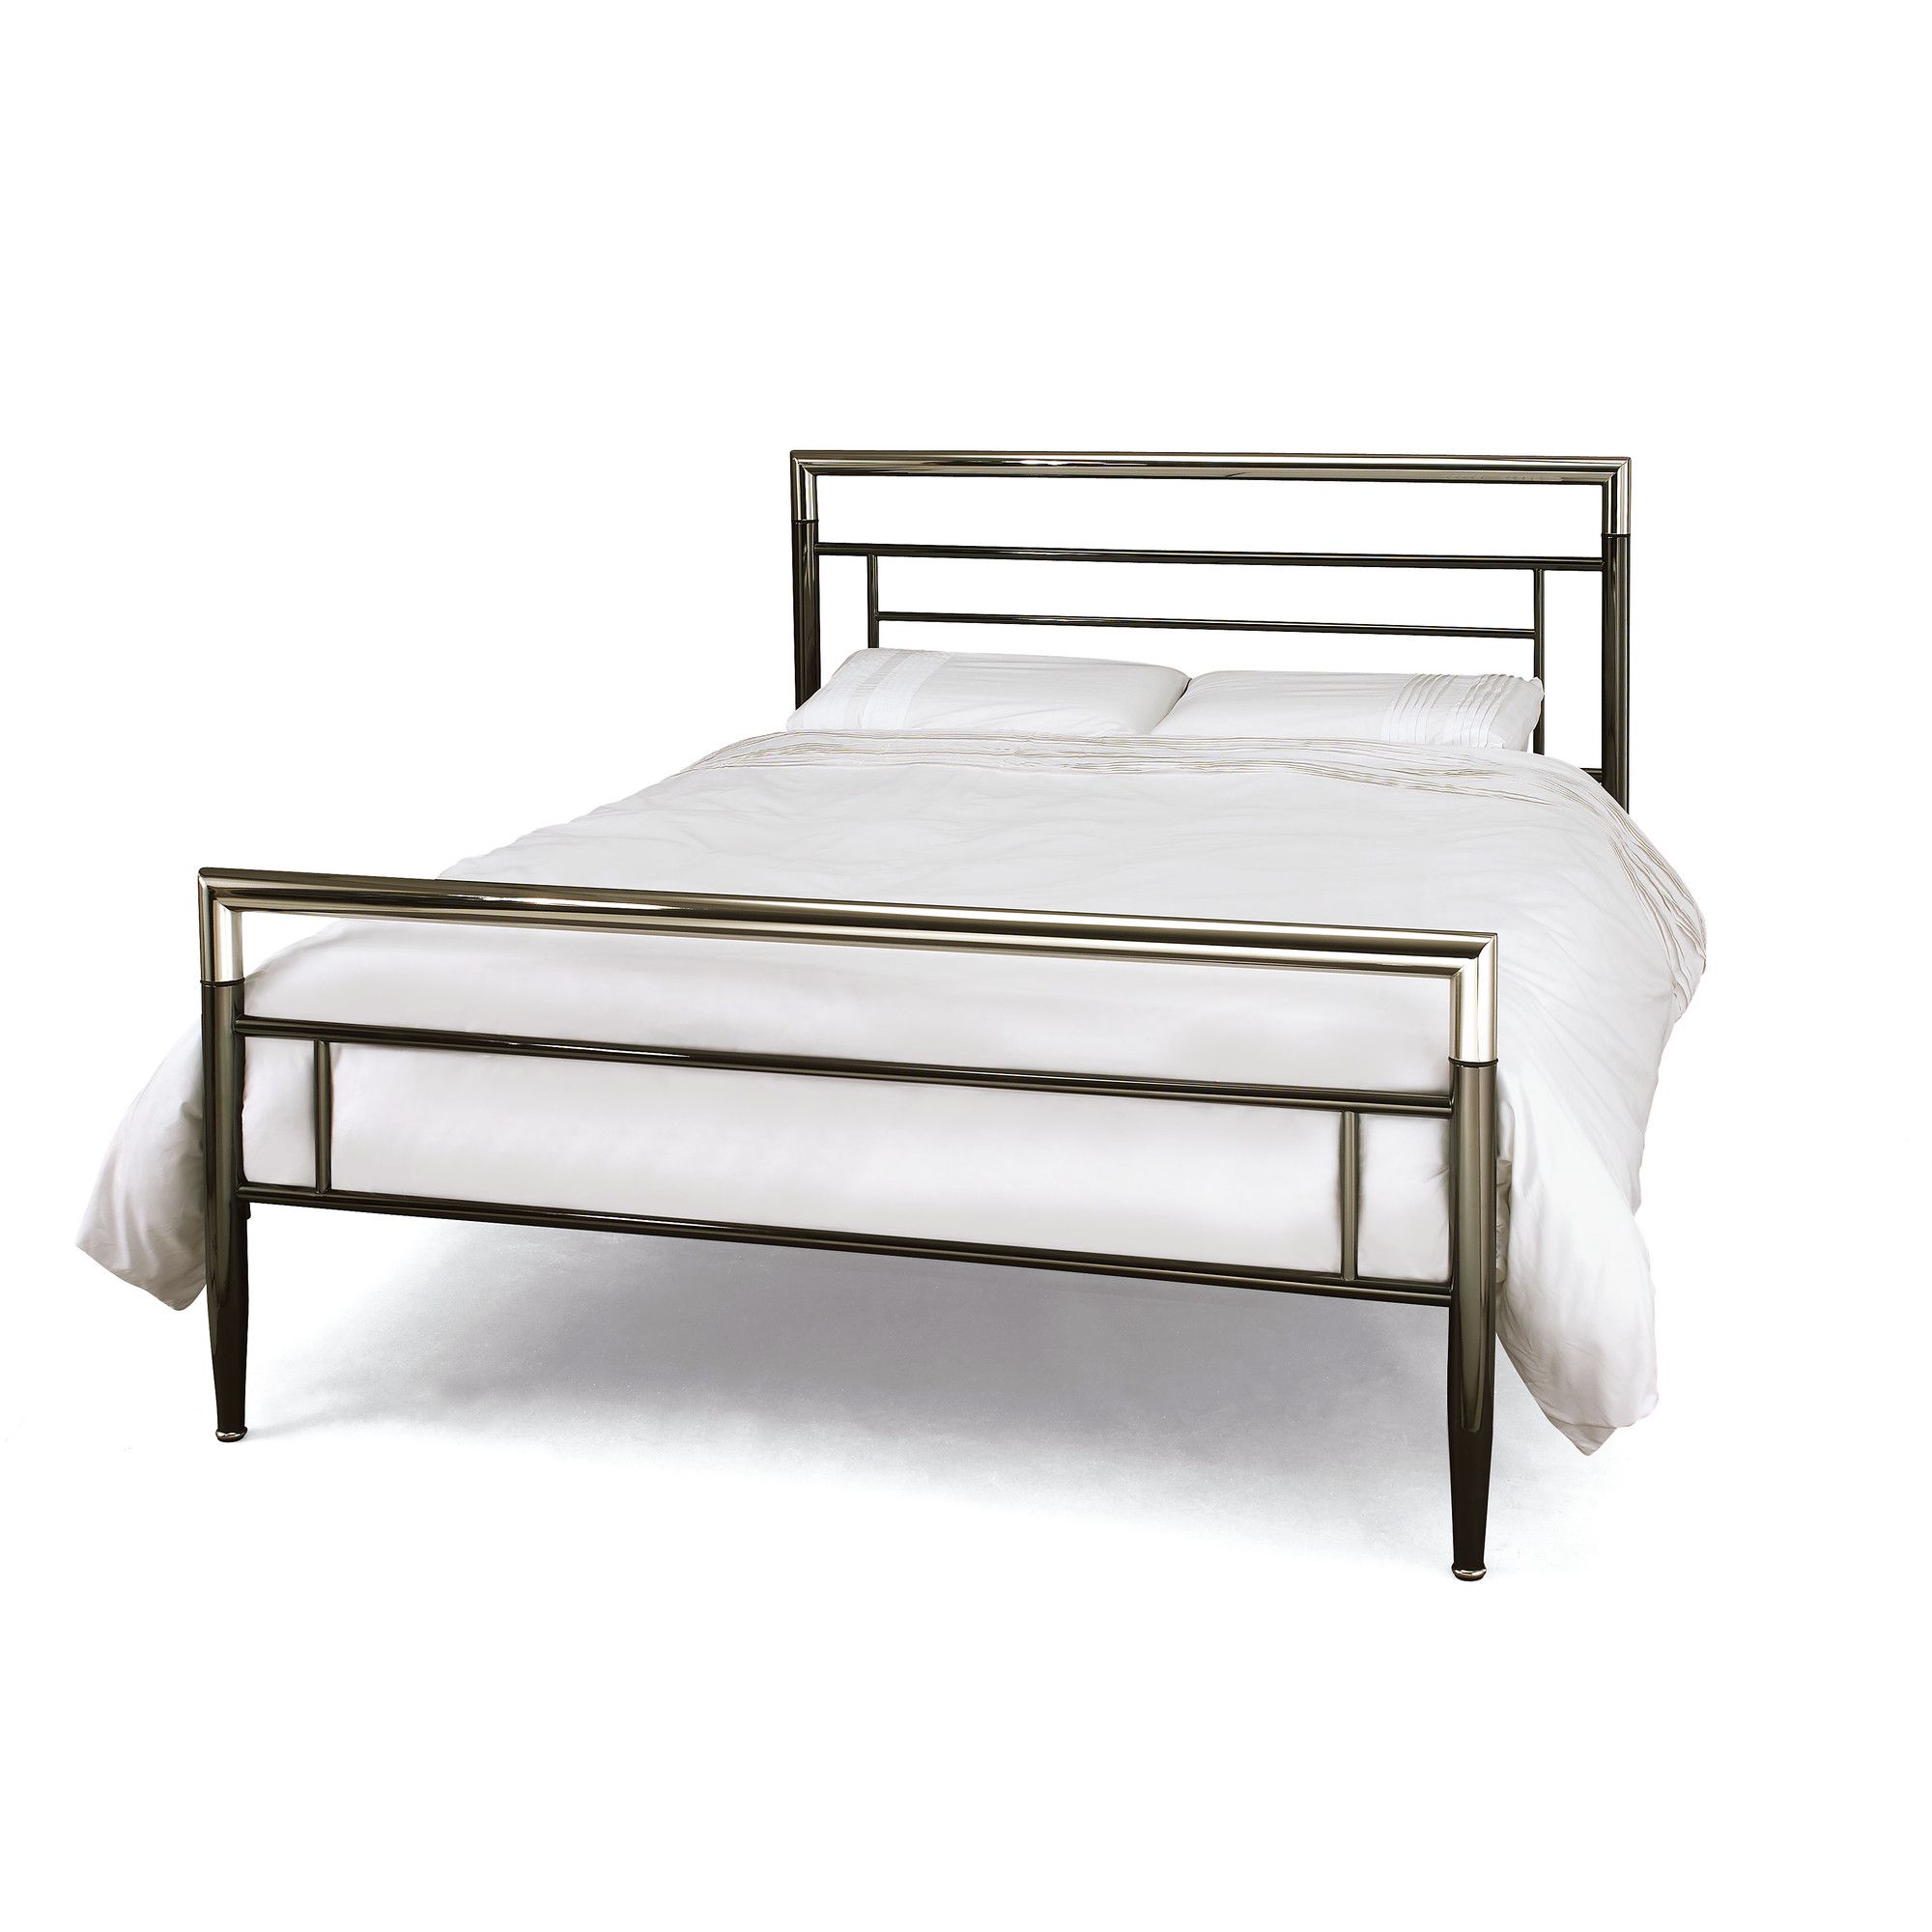 Serene Furnishings Pluto Bed Frame - Double at Tesco Direct